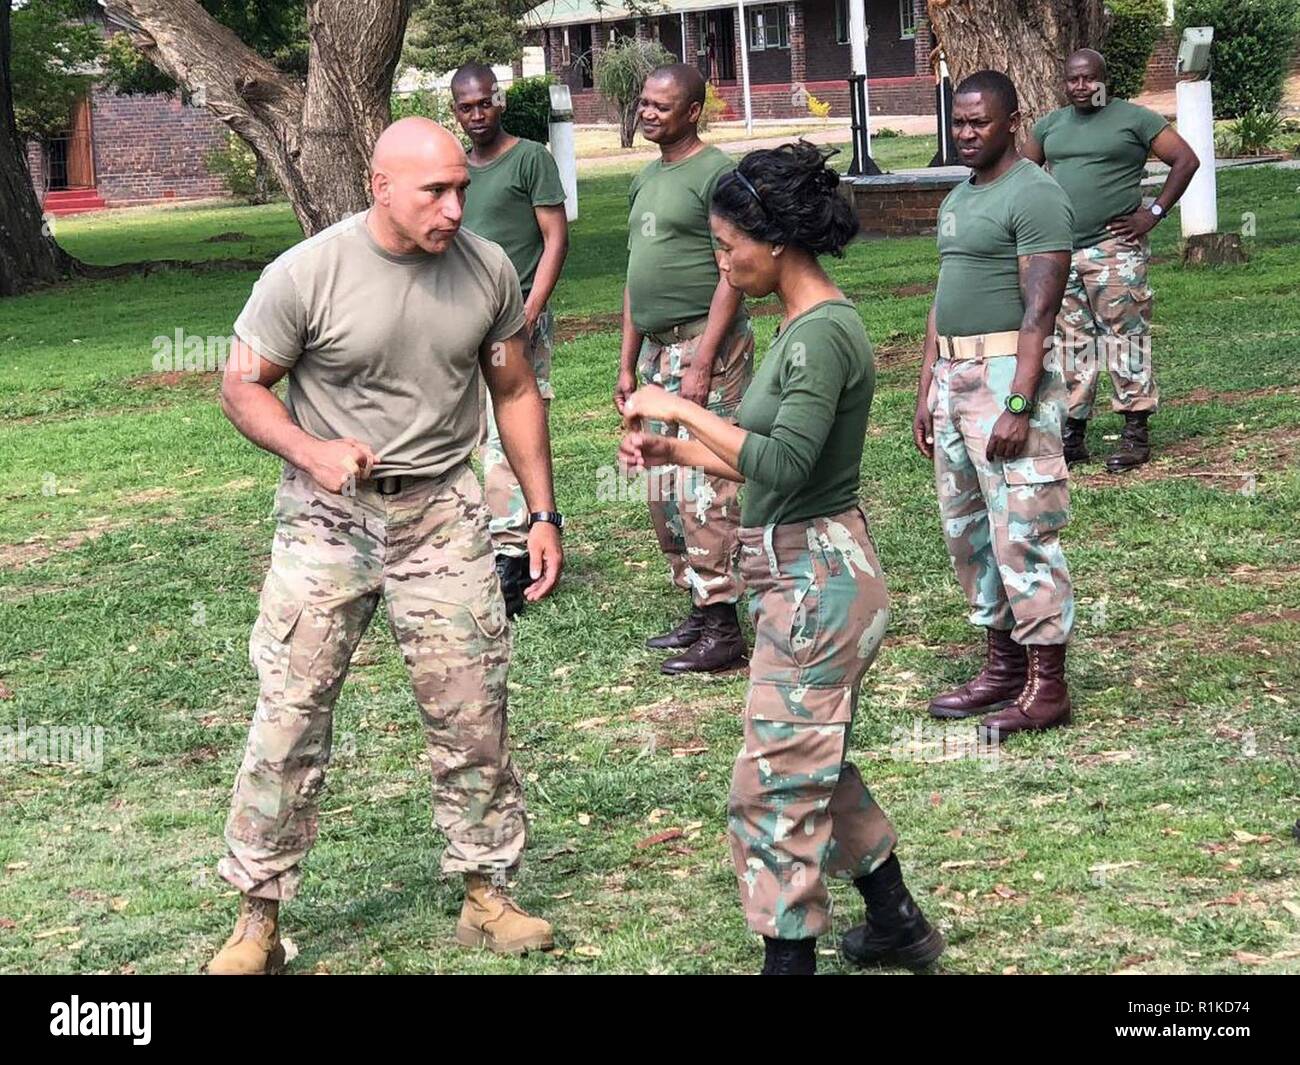 New York Army National Guard Master Sgt. Luis Barsallo, a certified hand-to-hand tactics instructor, demonstrates a move to members of the South African National Defense Forces during an  exchange visit on October 10, 2018. Soldiers from the New York Army National Guard took  part in an exchange program at the South African National Defense Forces Military Police School during an exchange visit there on Oct. 10-11, 2018. Twelve New York Army National Guard experts in civil support operations, military police, law enforcement, and self-defense took part in the exchange visit. ( U.S. Army Nation Stock Photo